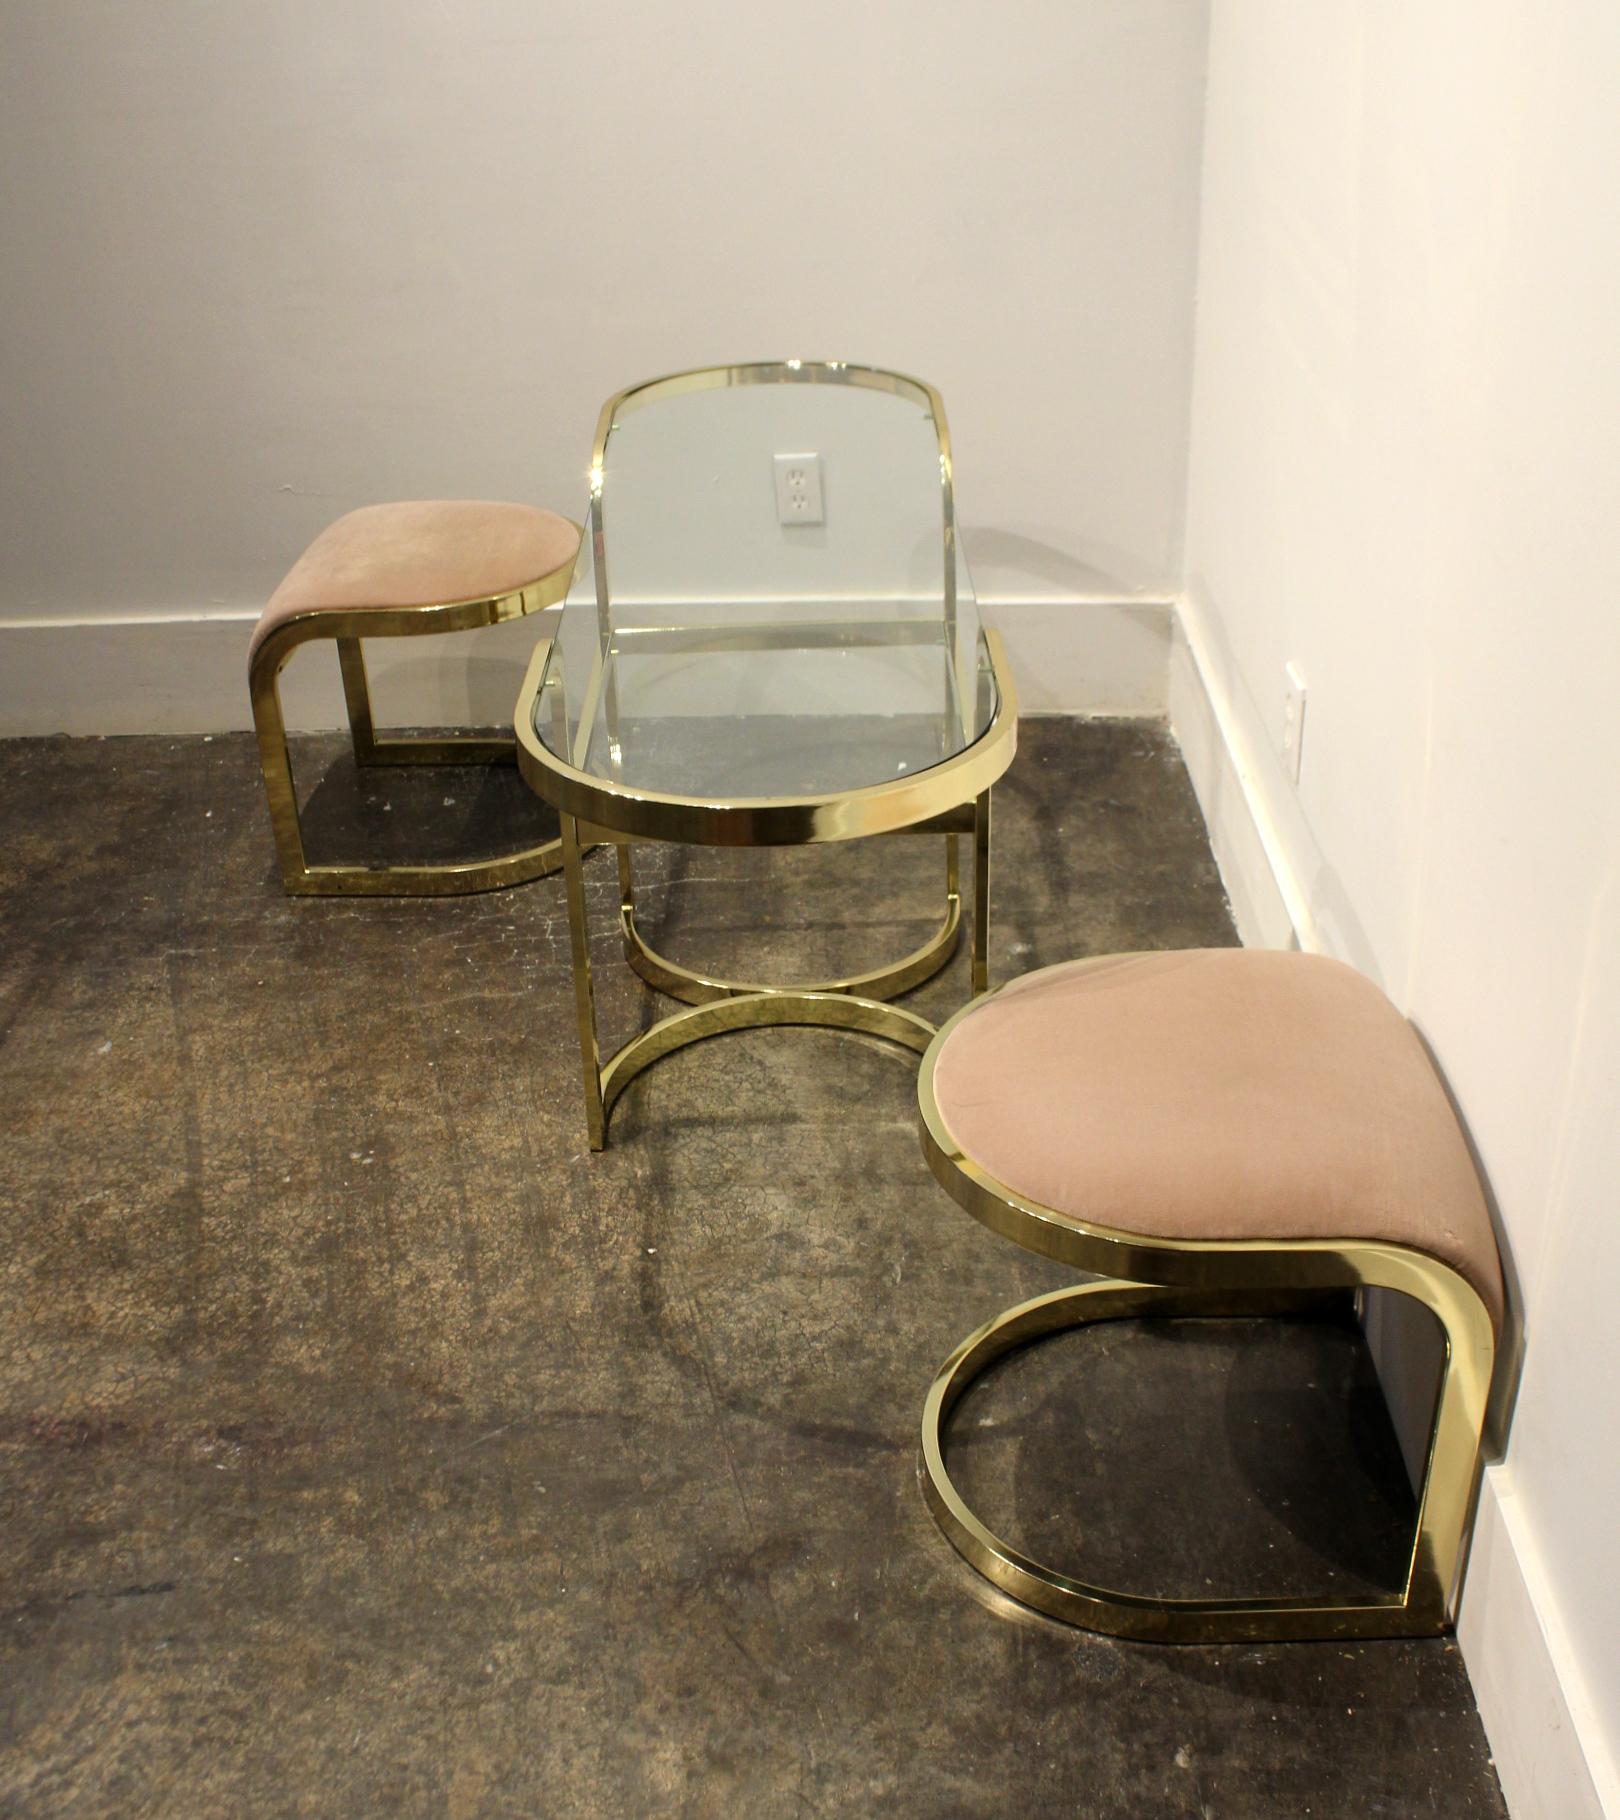 Brass Console Cafe Table with Pink Chairs by DIA Design Institute of America (amerikanisch) im Angebot